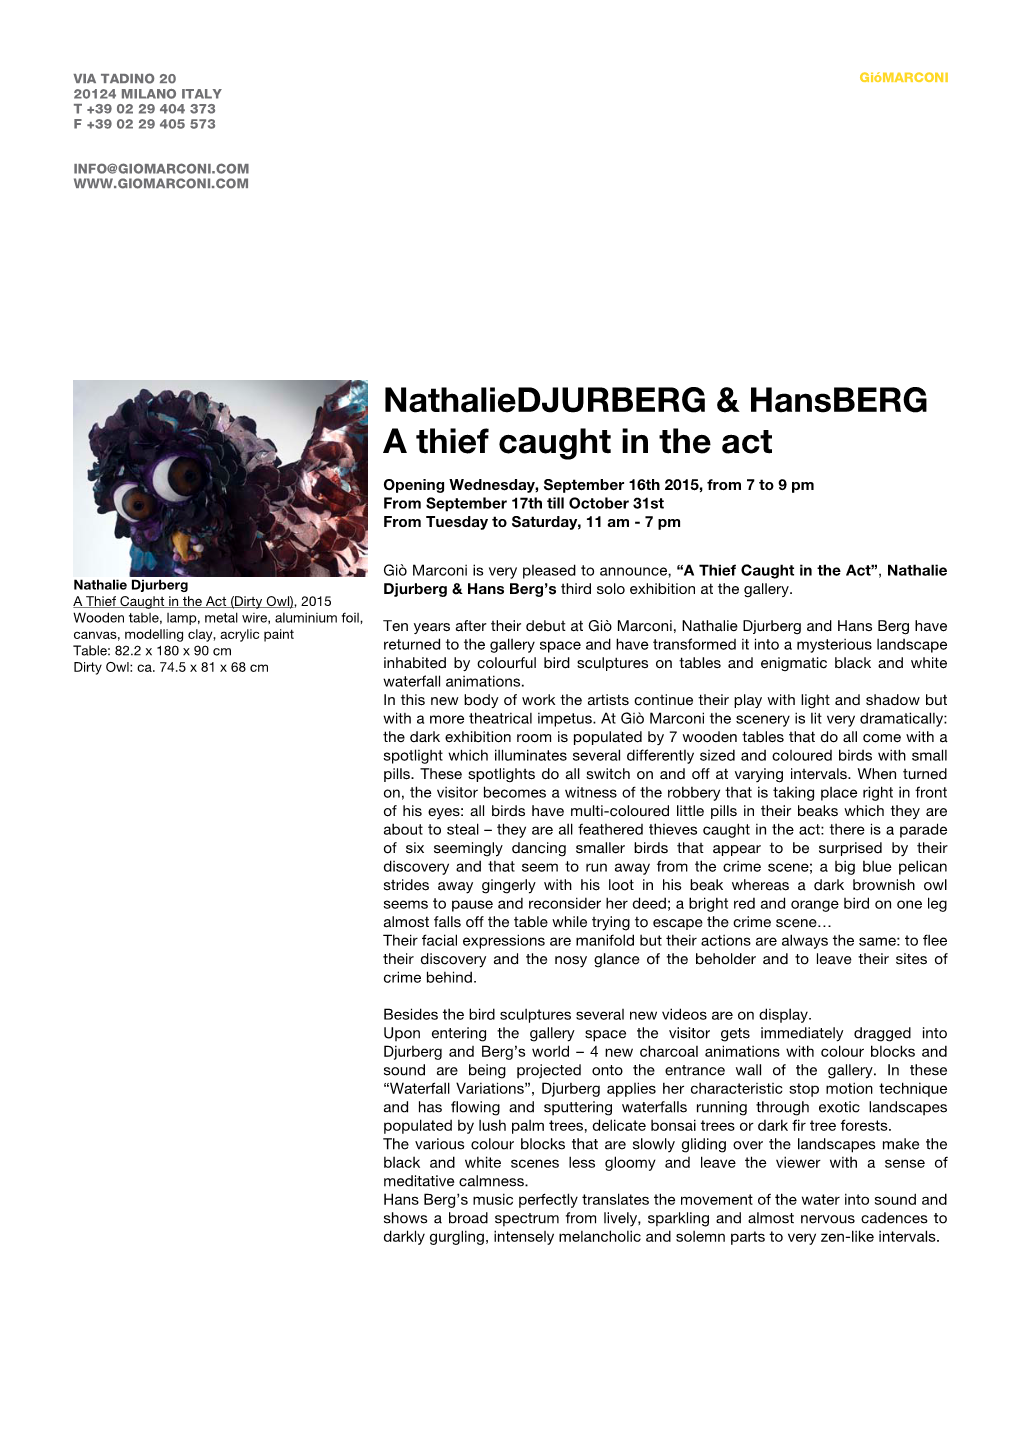 Nathaliedjurberg & Hansberg a Thief Caught in The